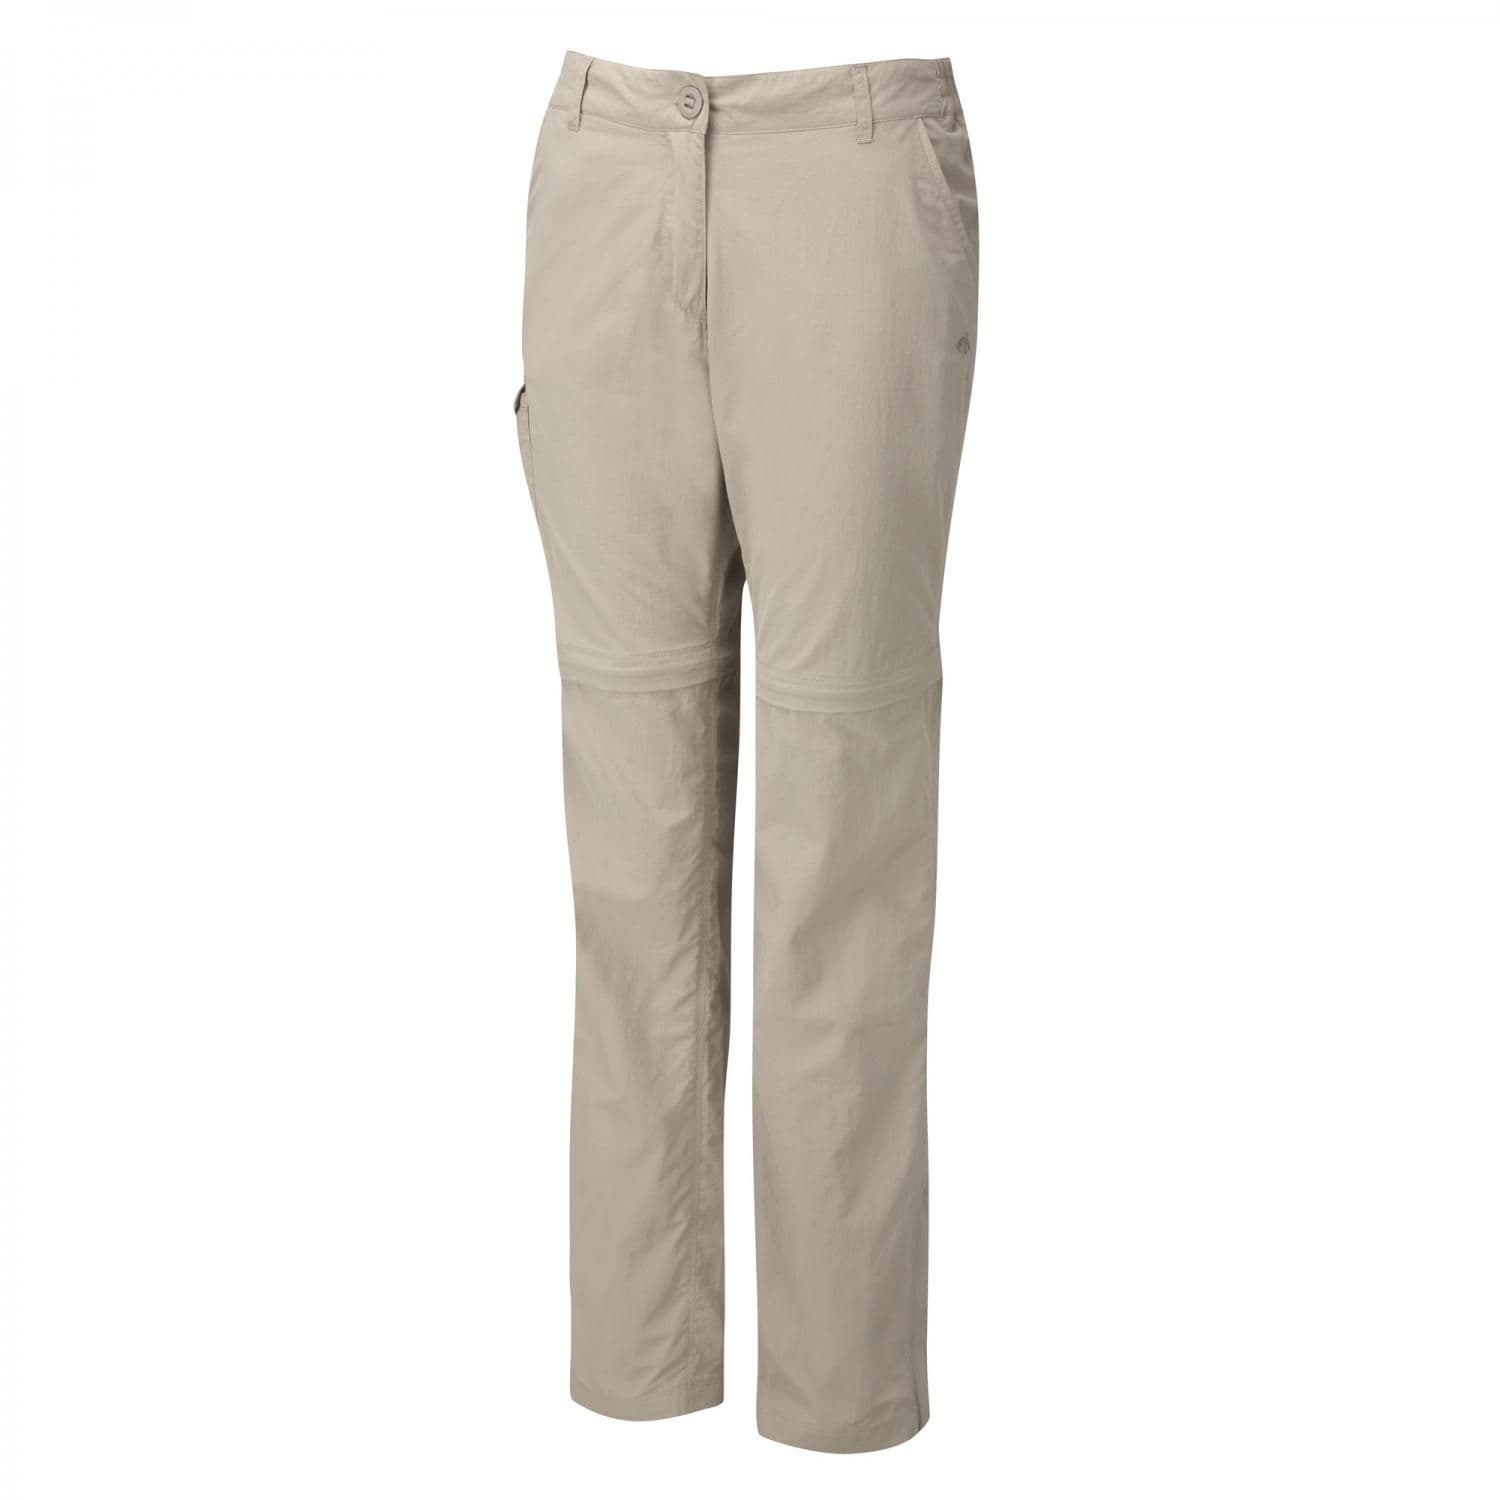 Craghoppers Mushroom Nosilife Convertible Trousers